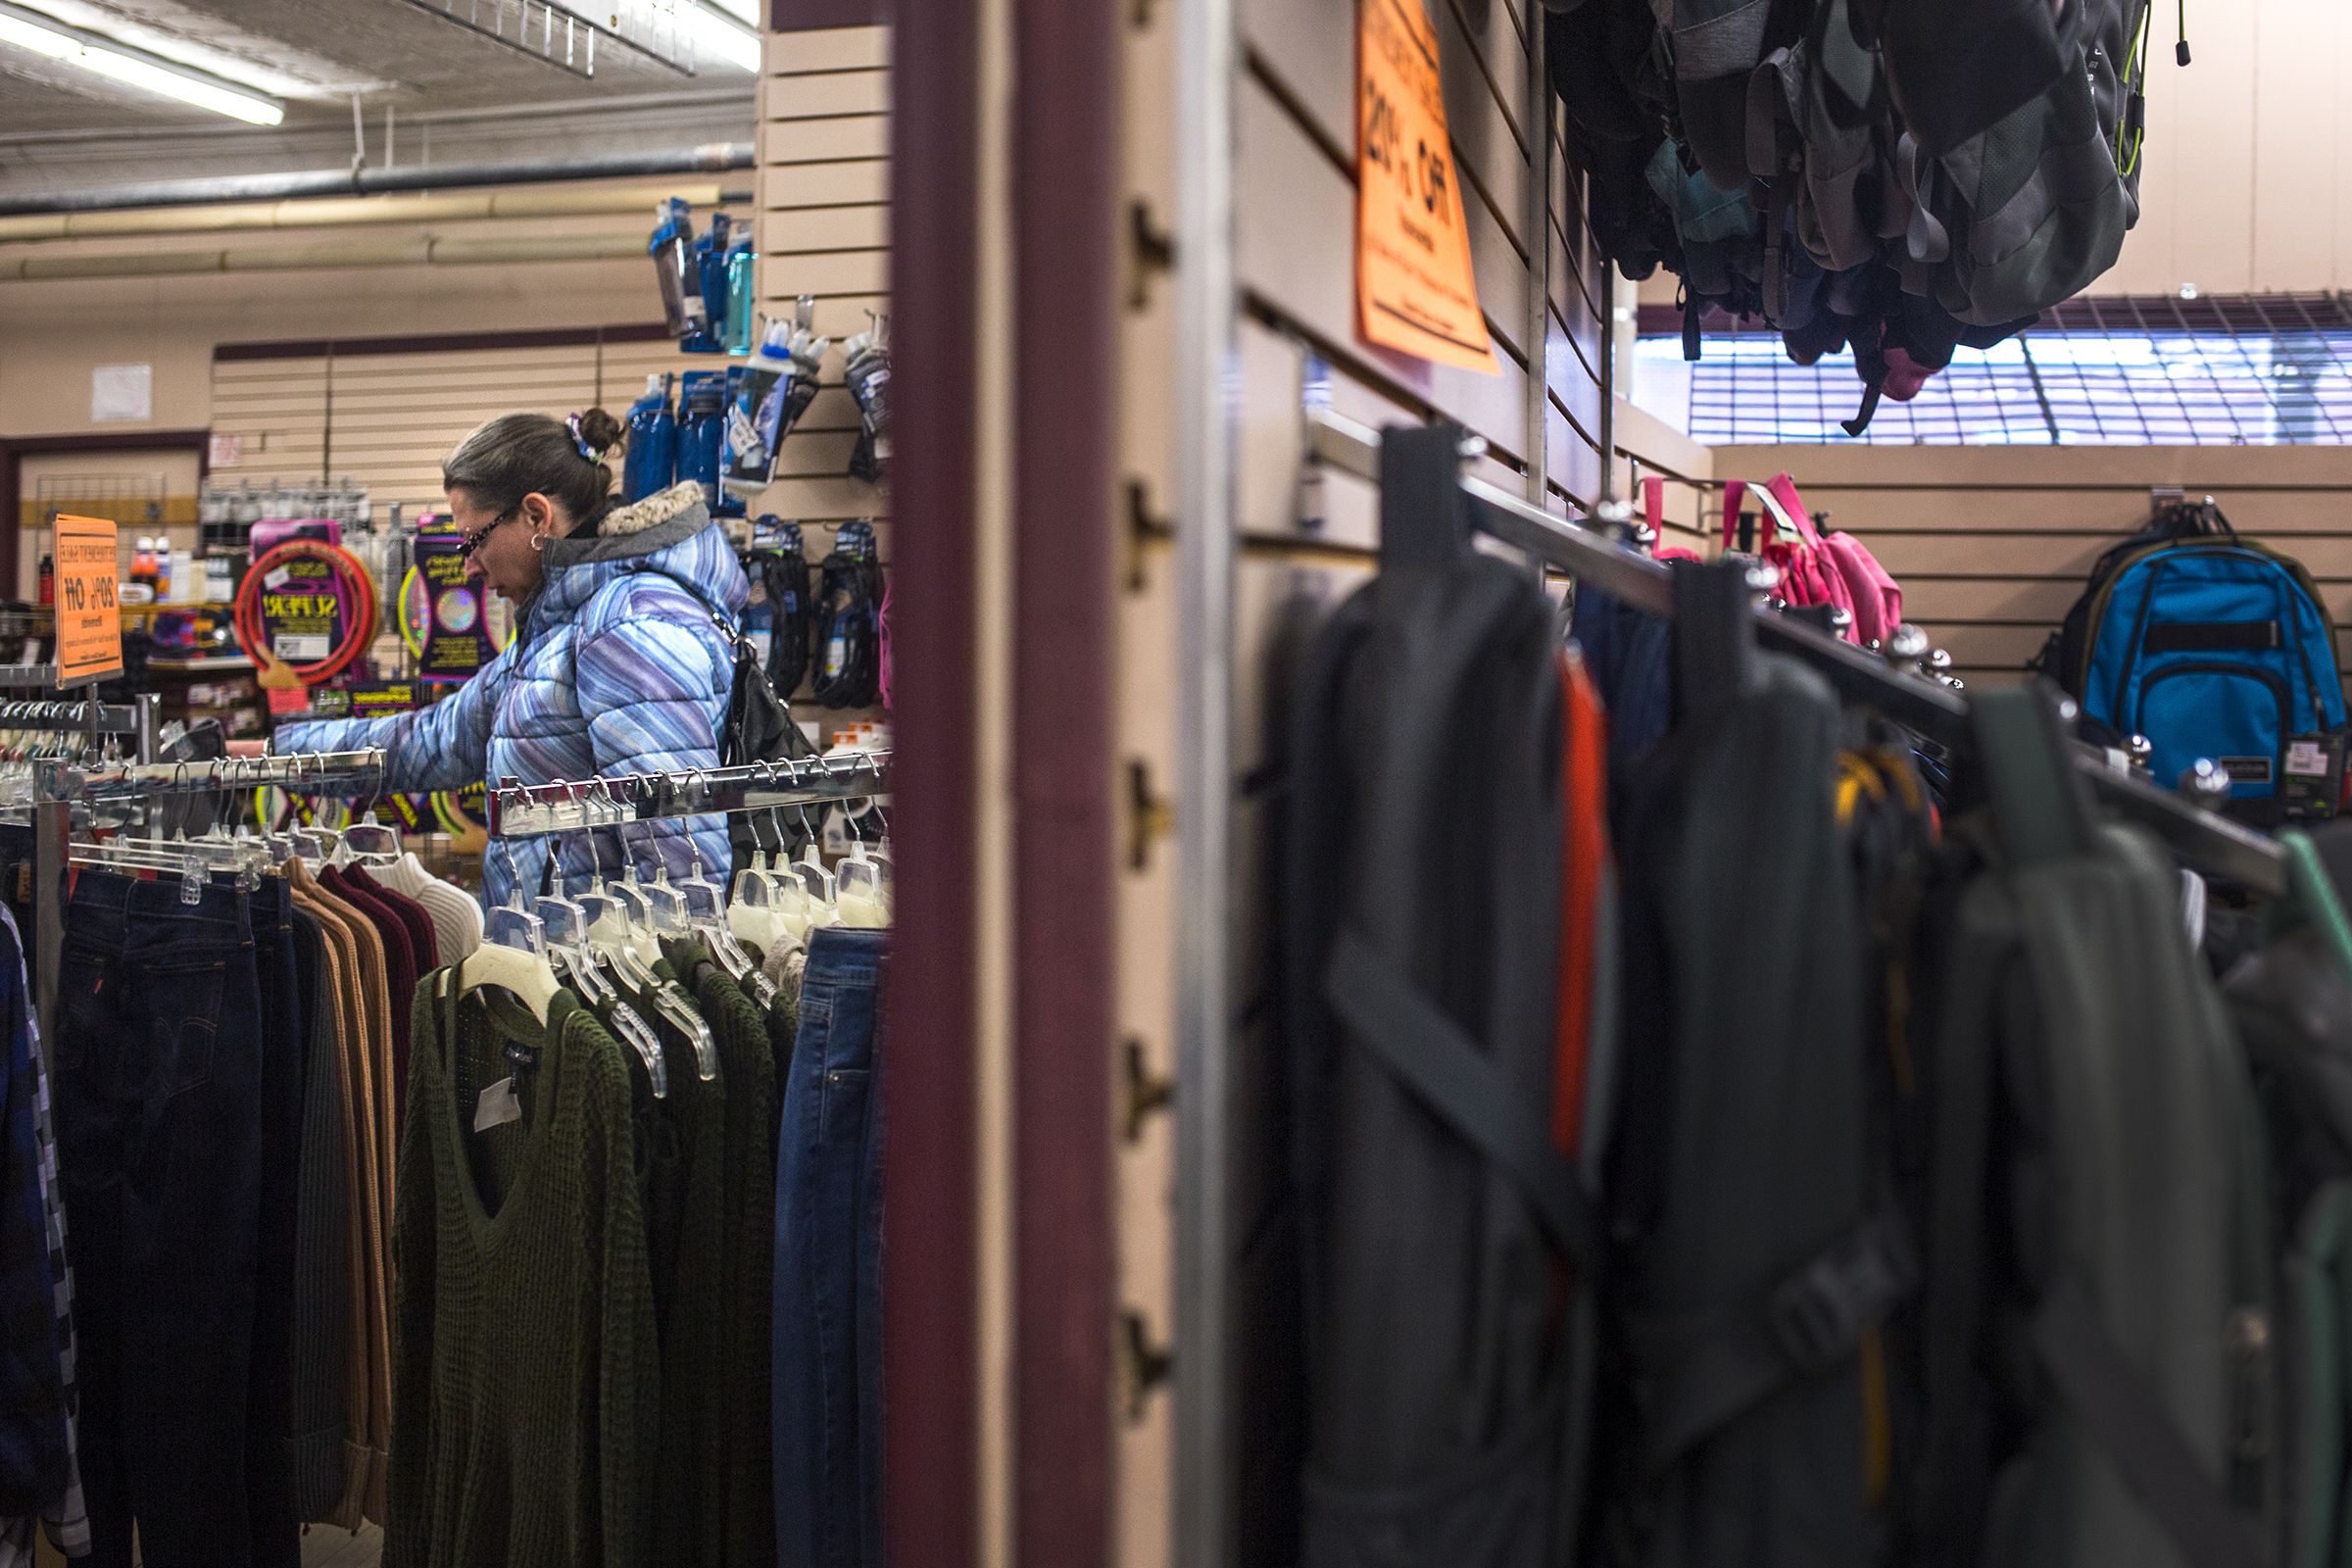 Cori Stackpole, of Newport, N.H., looks at a pair of pants during the closing sale at Hubert's Department Store in Newport on Feb. 1, 2018. Stackpole has been coming to the store since she was a teenager and said it will be sad to see the store go because there is not much in town. (Valley News - Carly Geraci) Copyright Valley News. May not be reprinted or used online without permission. Send requests to permission@vnews.com.